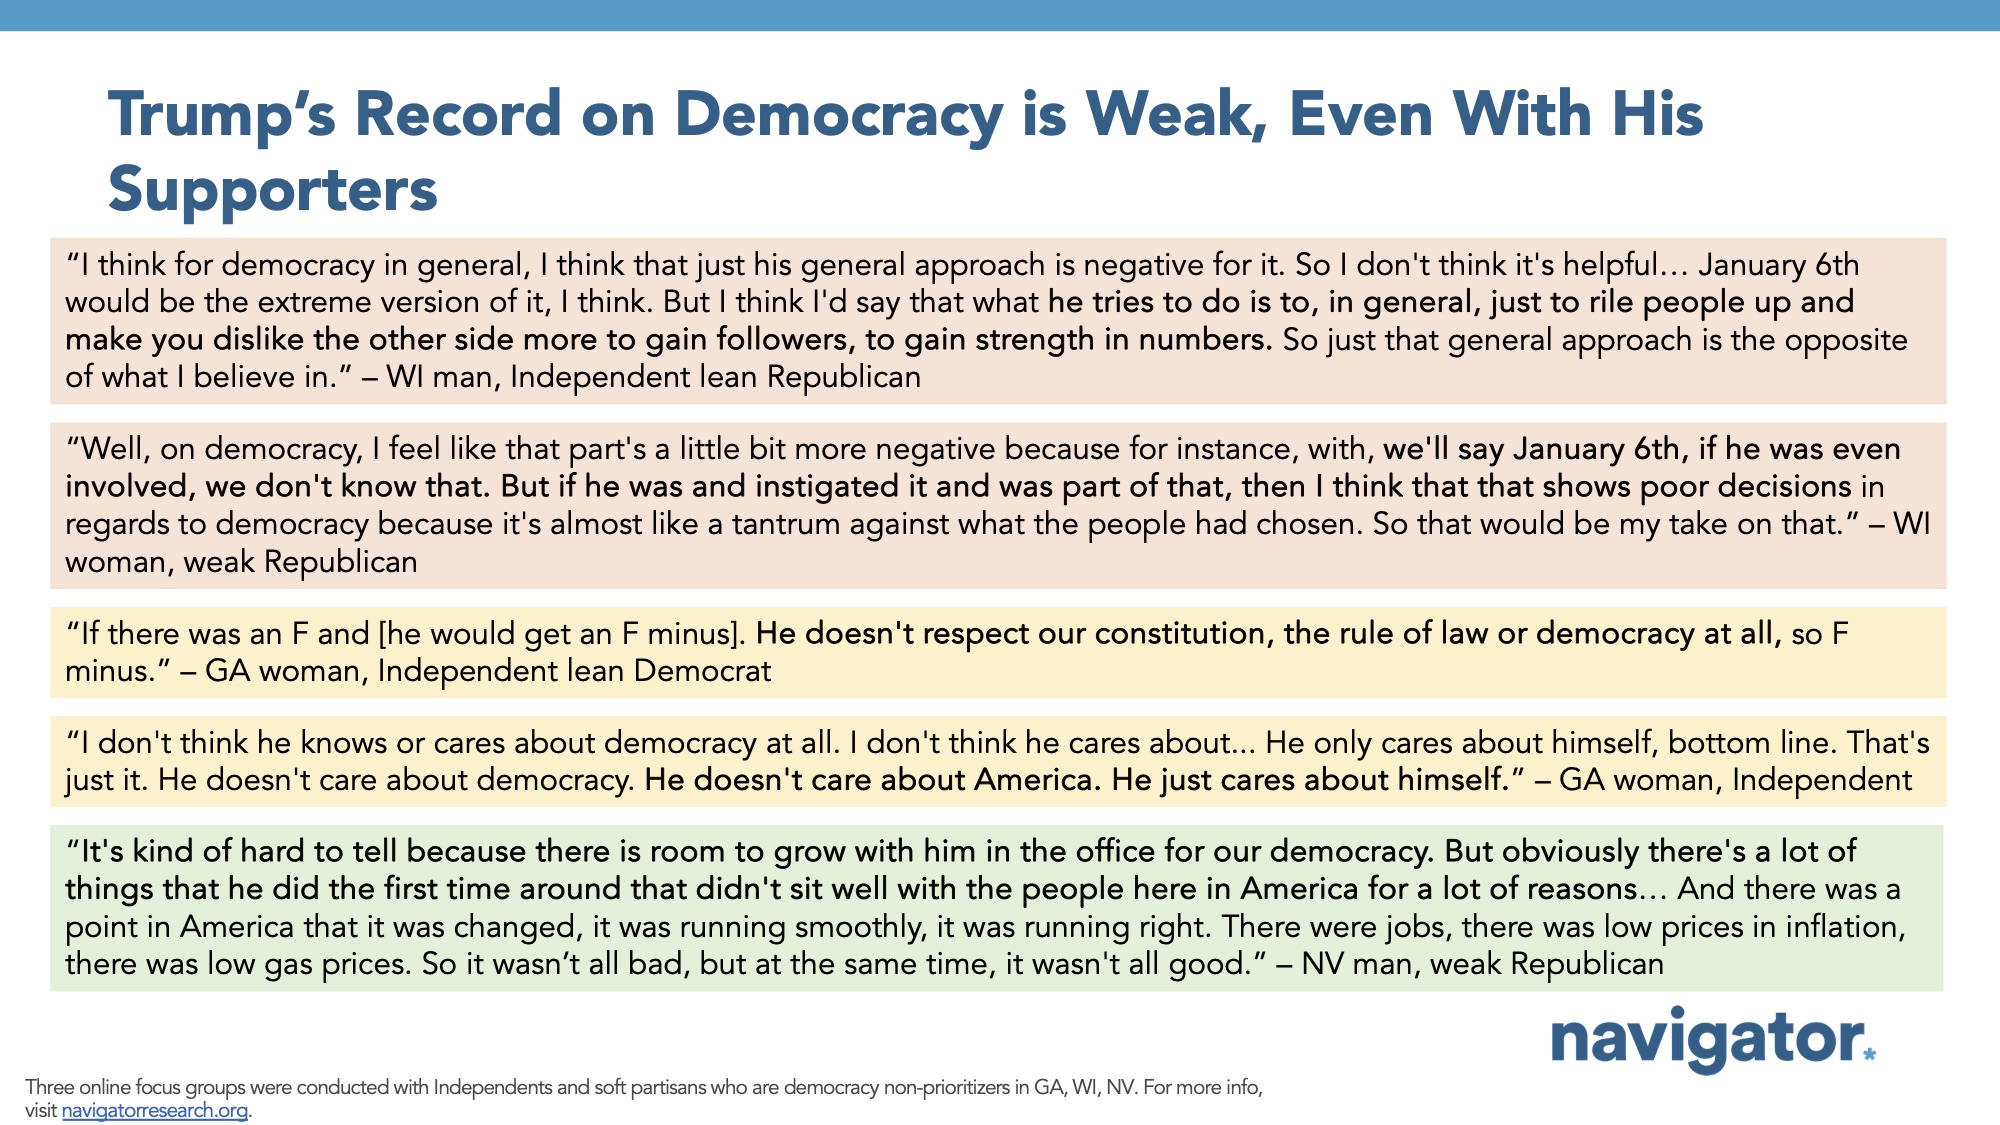 Focus group report slide titled: Trump’s Record on Democracy is Weak, Even With His Supporters